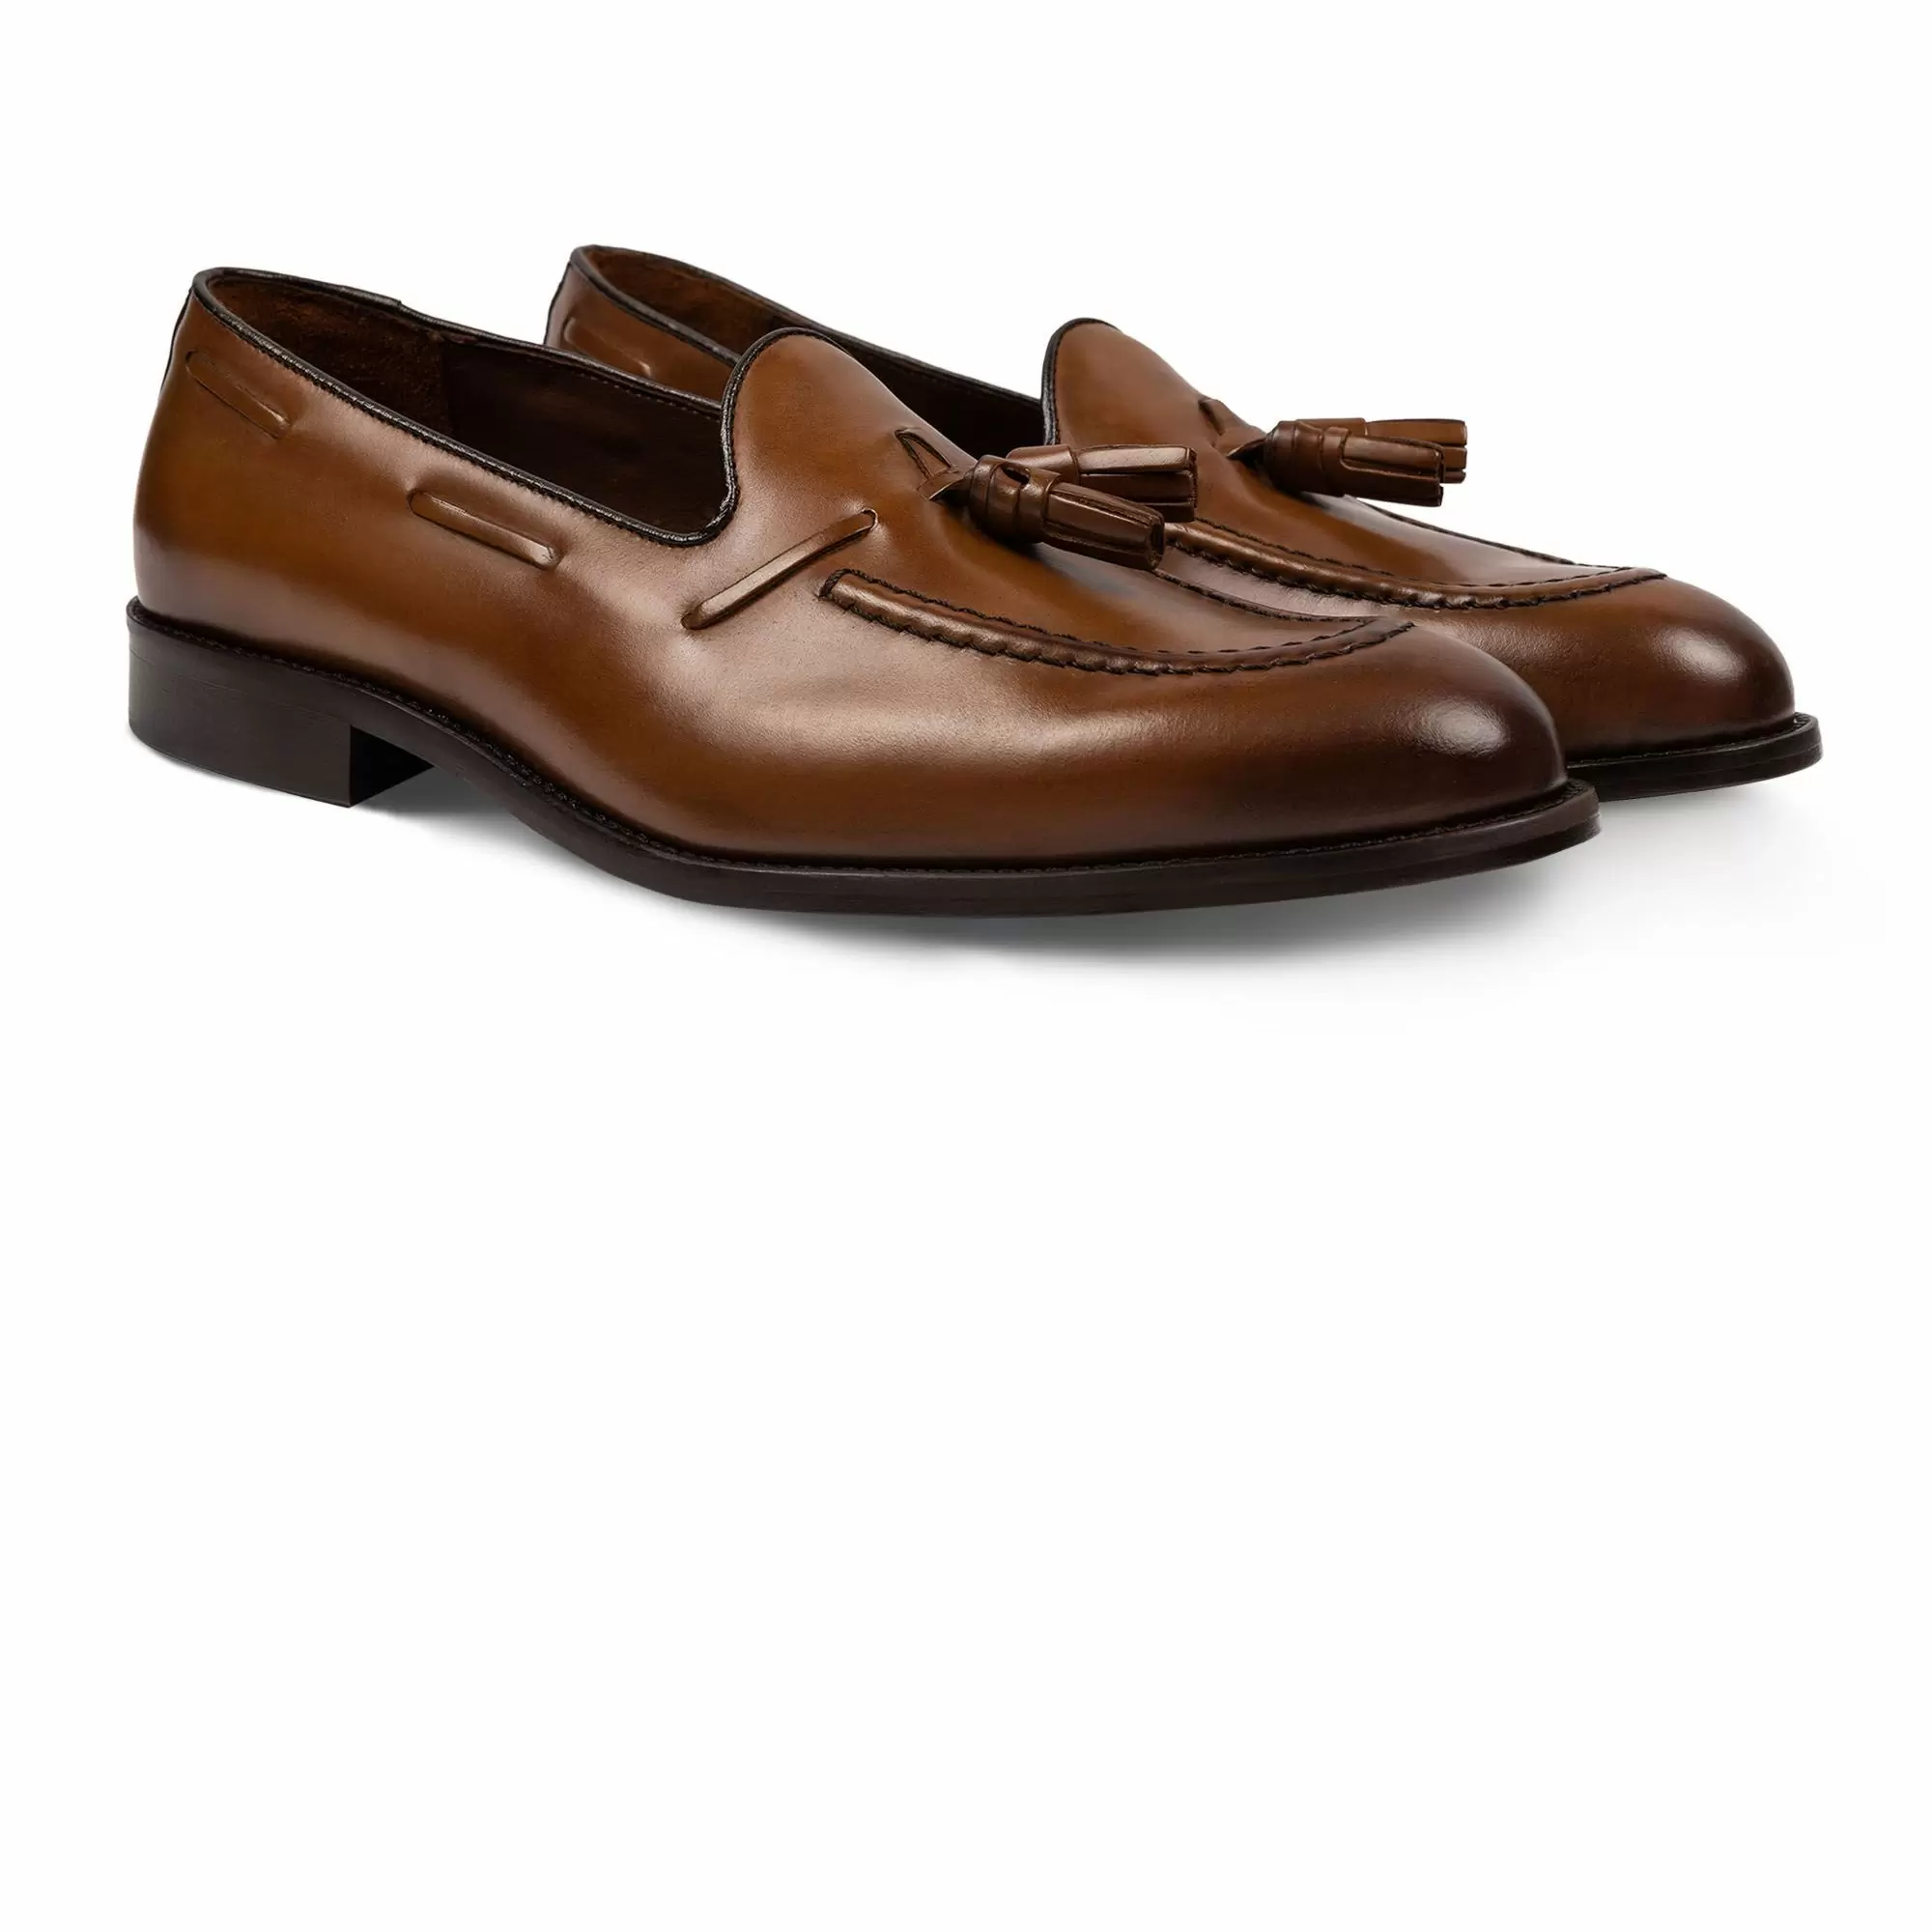 Aνδρικά Δερμάτινα Loafers Με Φουντάκια Ταμπά Tailor Italian Wear